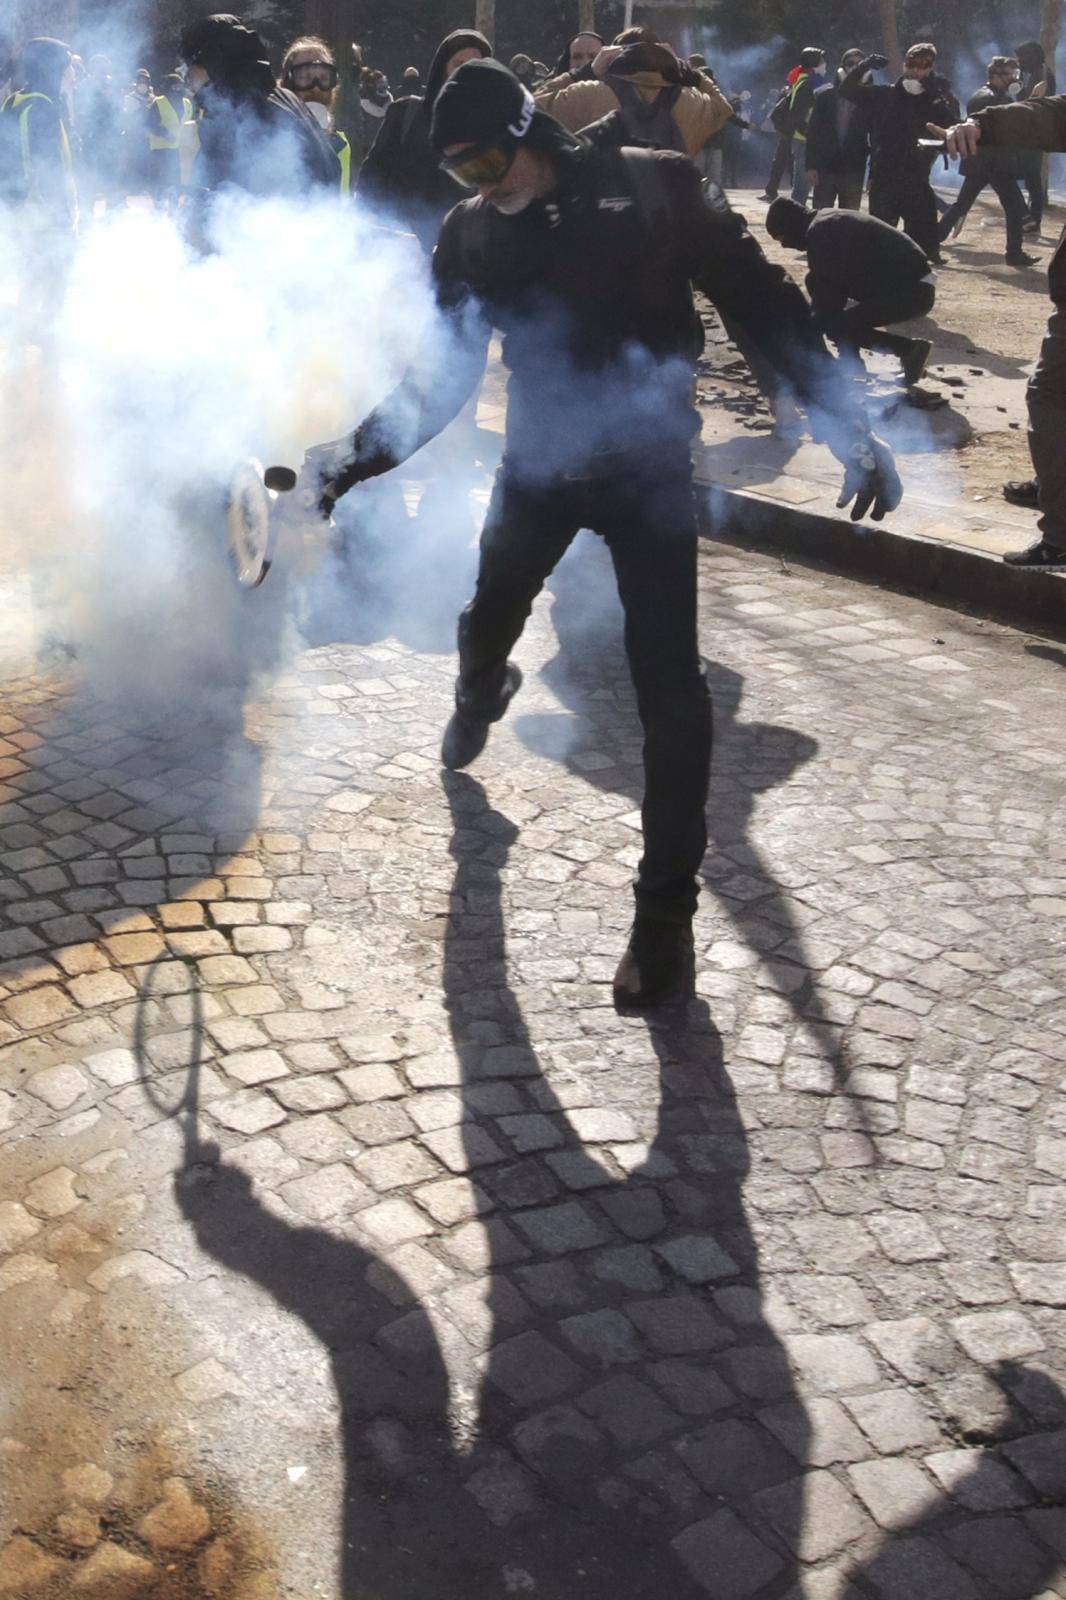 Protester throws back tear gas canister during demonstration by "yellow vests" in Paris